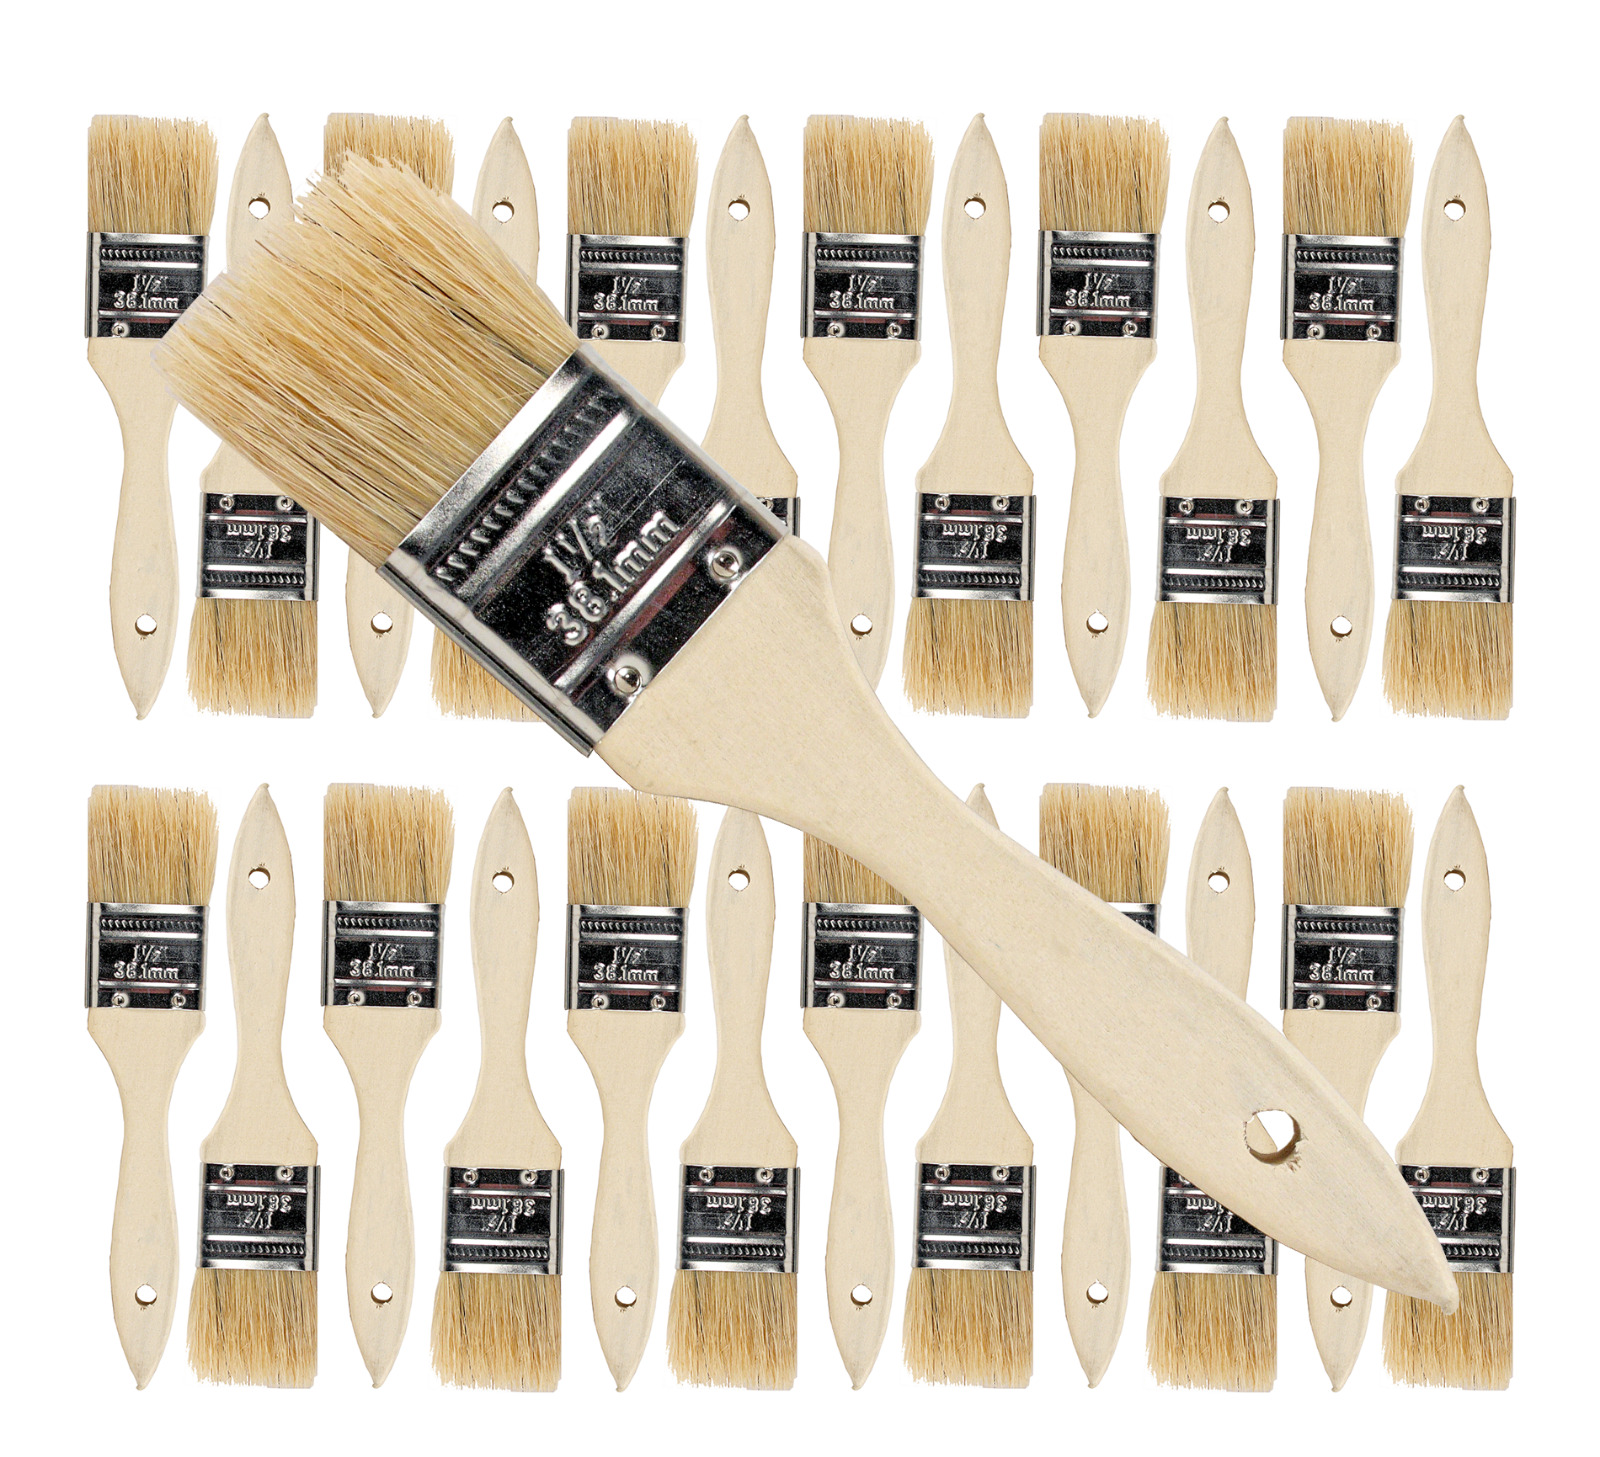 24 Pk- 1.5 inch Chip Paint Brushes for Paint, Stains,Varnishes,Glues,Gesso